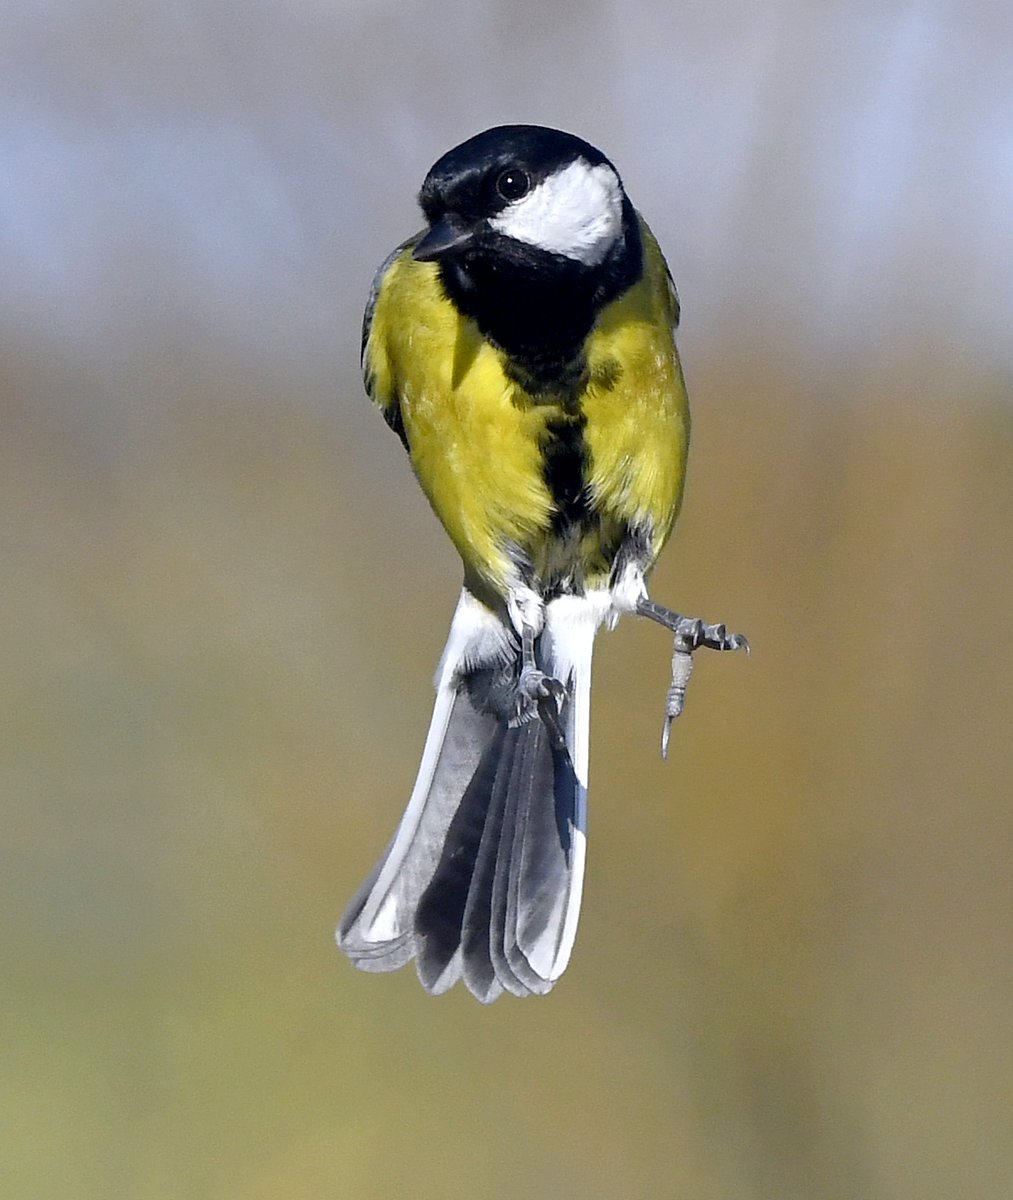 No wings Great Tit.Redwing with the prize.Kingfisher on a thorny branch.Heron take-off.Please vote for your favourite in the poll below 